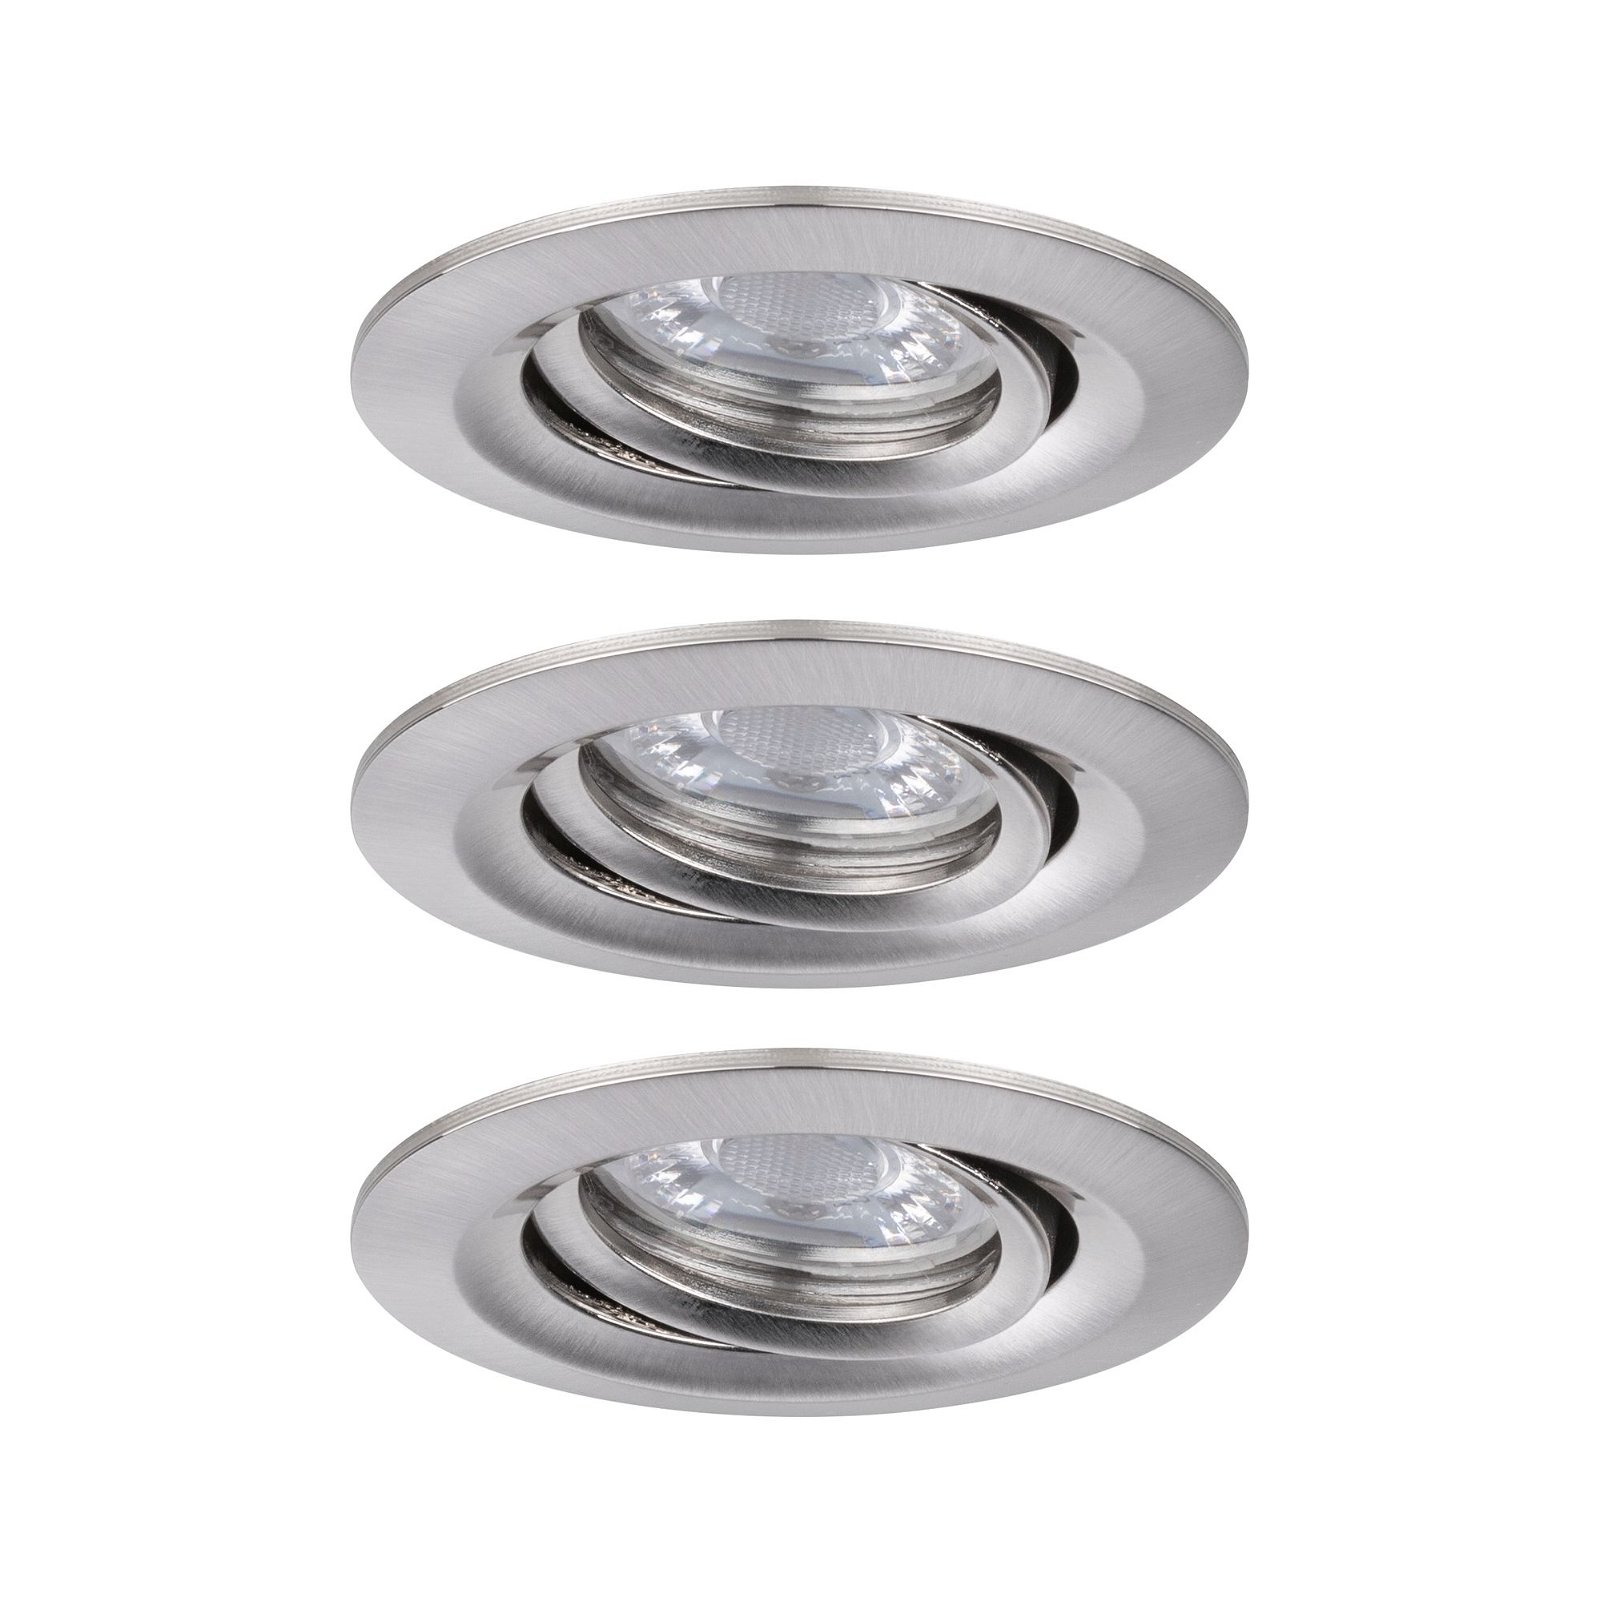 LED Recessed luminaire Easy Dim Nova Mini Plus Coin Basic Set Swivelling round 66mm 15° Coin 3x4,2W 3x300lm 230V dimmable 2700K Brushed iron